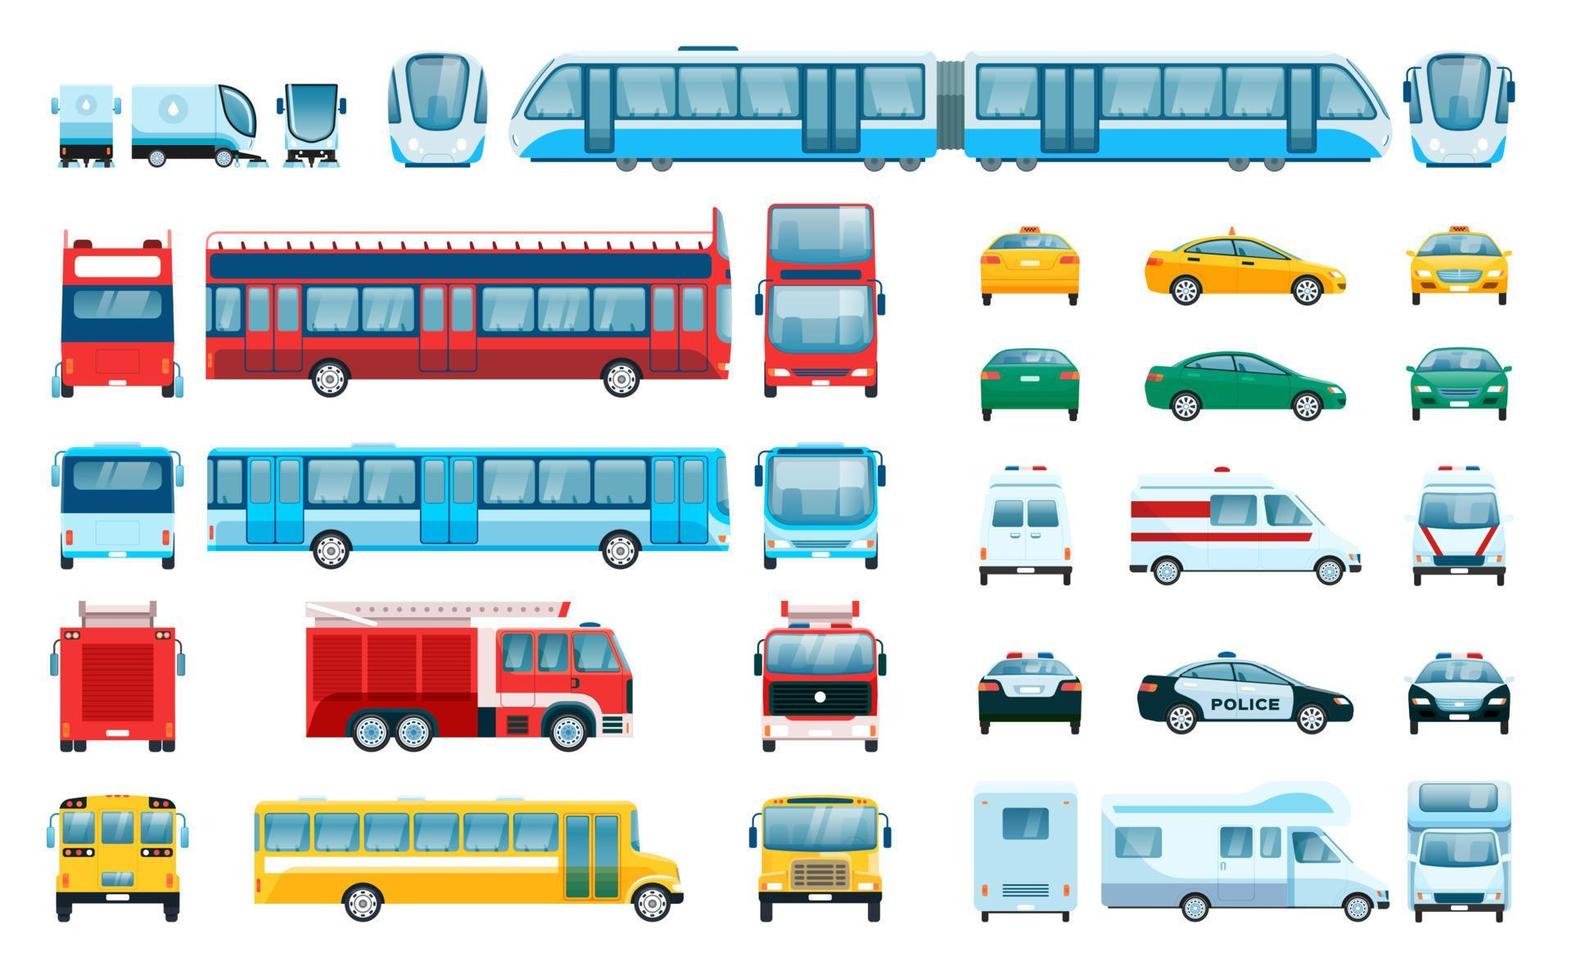 Car side front back view. Urban vehicles Passenger car, taxi, police car, train. Flat city public transport from different angles Vector set